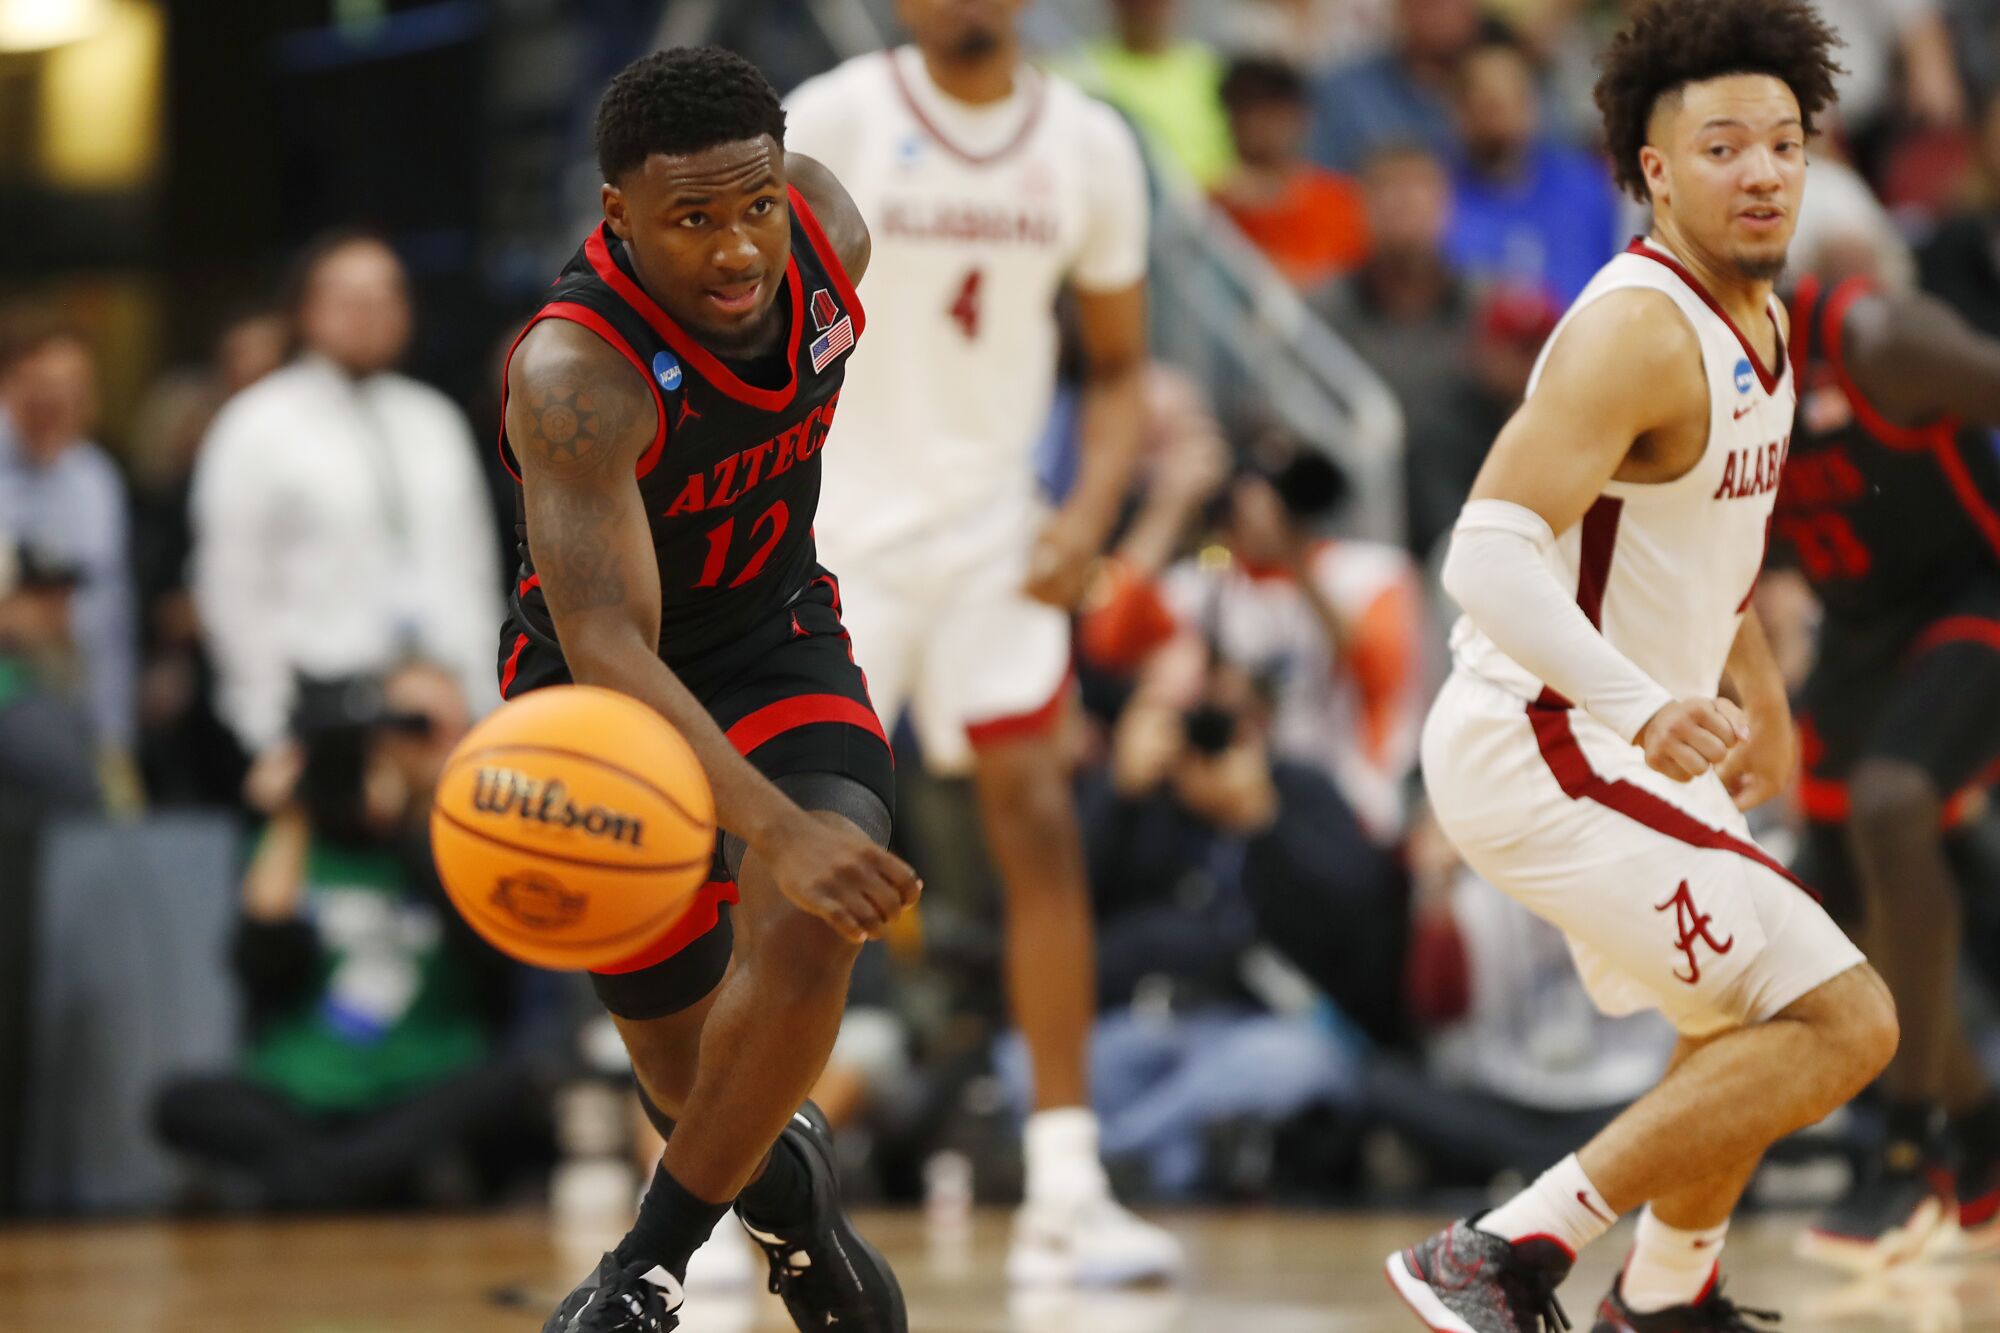 Aztecs guard Darrion Trammell steals the ball from Alabama's Mark Sears in an NCAA Tournament game Friday in Louisville, Ky.